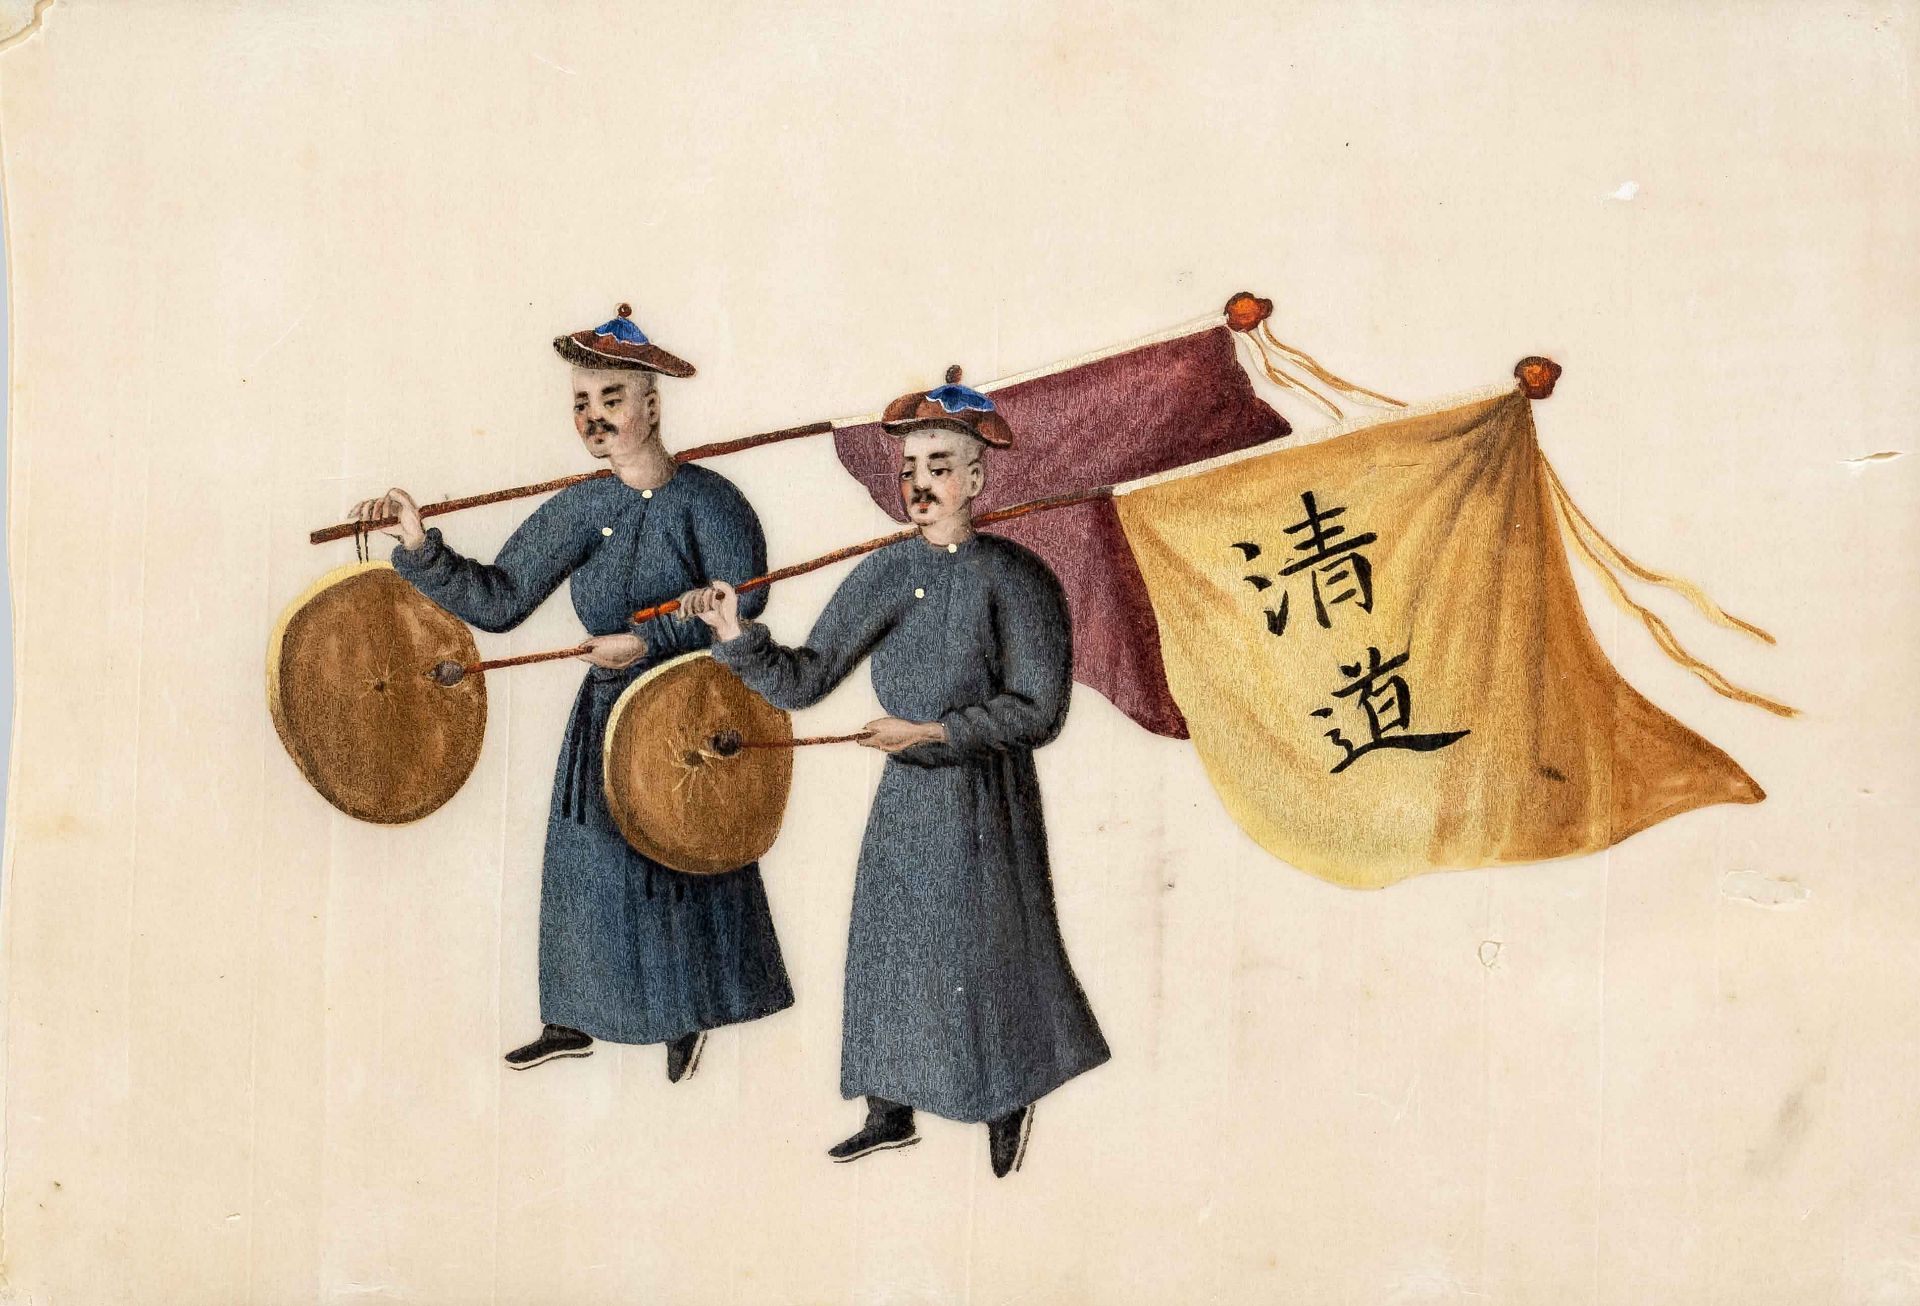 ''The gong beaters of Qingdao'', China, Qing dynasty(1644-1911), gouache on rice paper, doubled, two